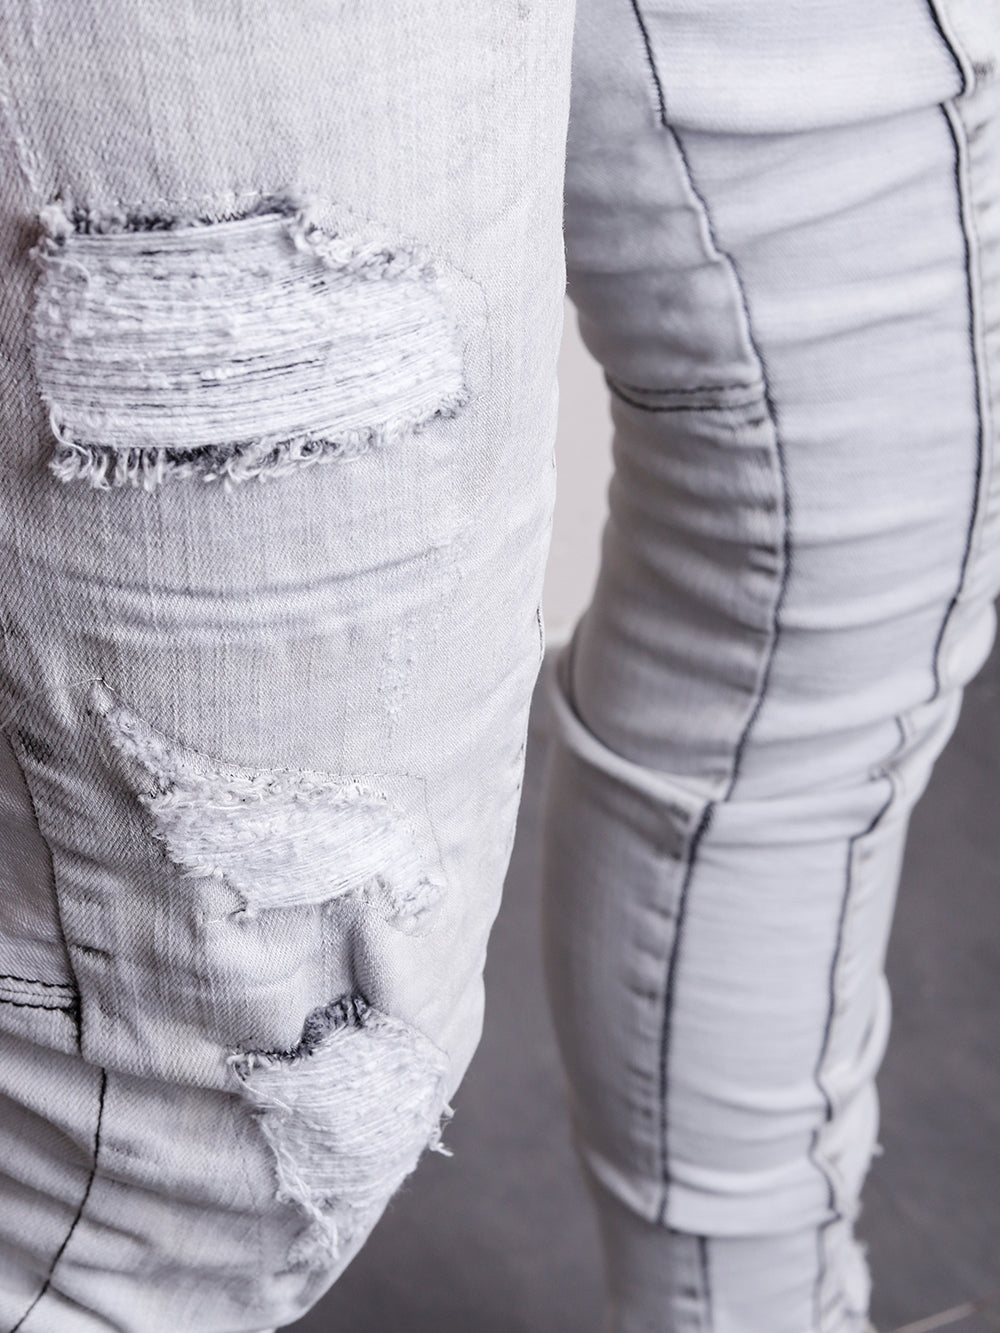 A close up of a person wearing CLOUD 9 distressed denim jeans.